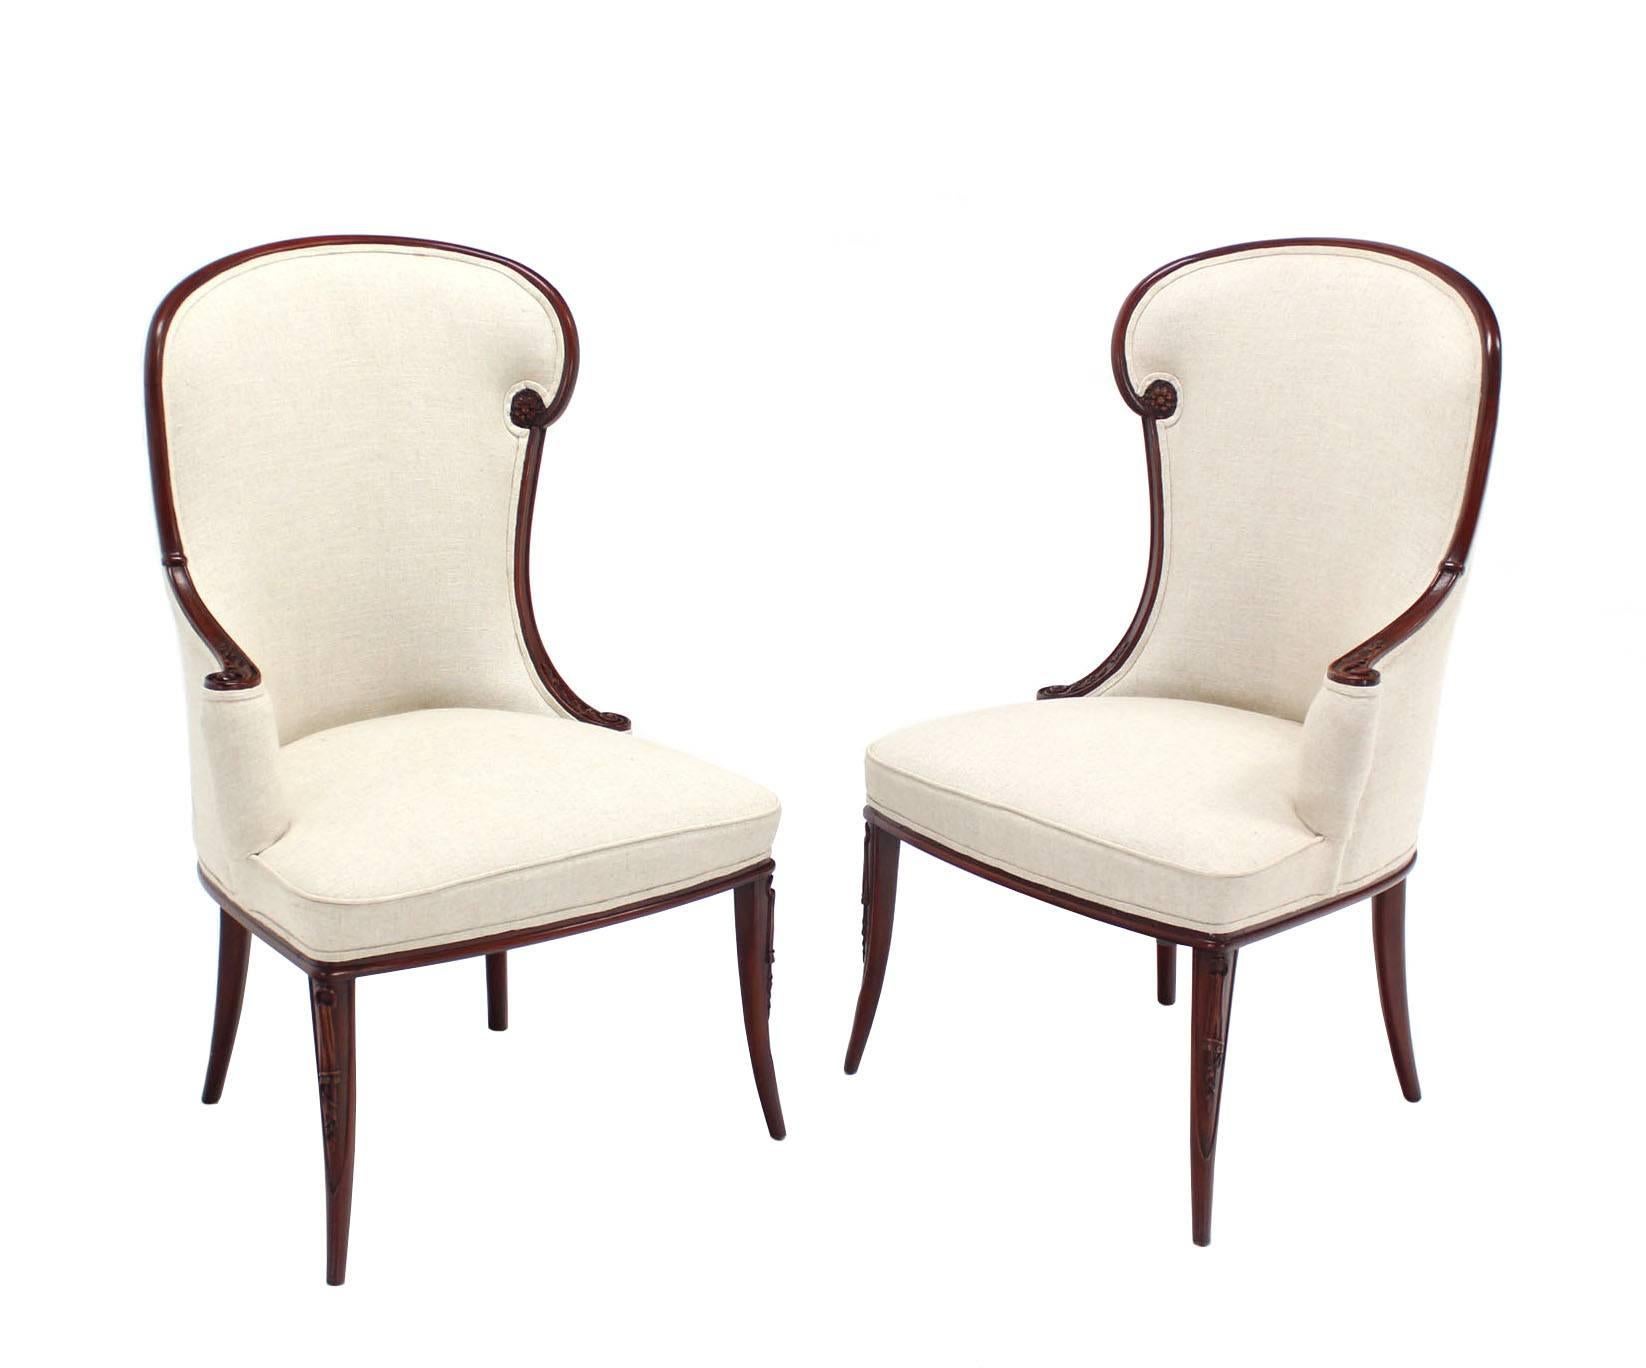 Pair of new Belgian linen upholstery fire side assimetrical wing lounge chairs. Excellent condition, featuring very elegant yet complex design lines.